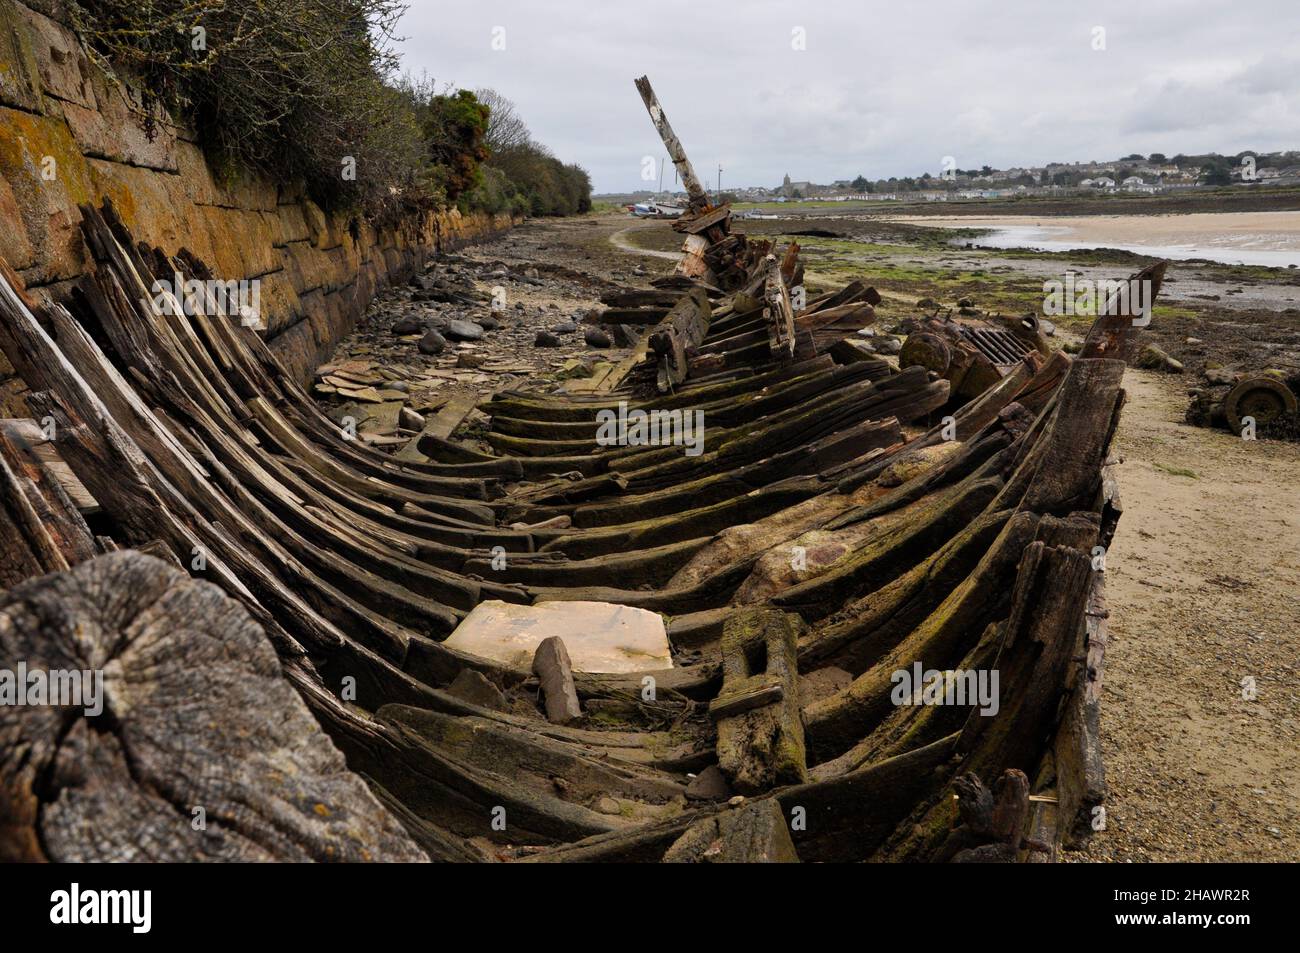 Remains of the hull of a wrecked wooden boat on the foreshore in the tidal estuary of the river Hayle nr St.Ives in Cornwall, UK Stock Photo